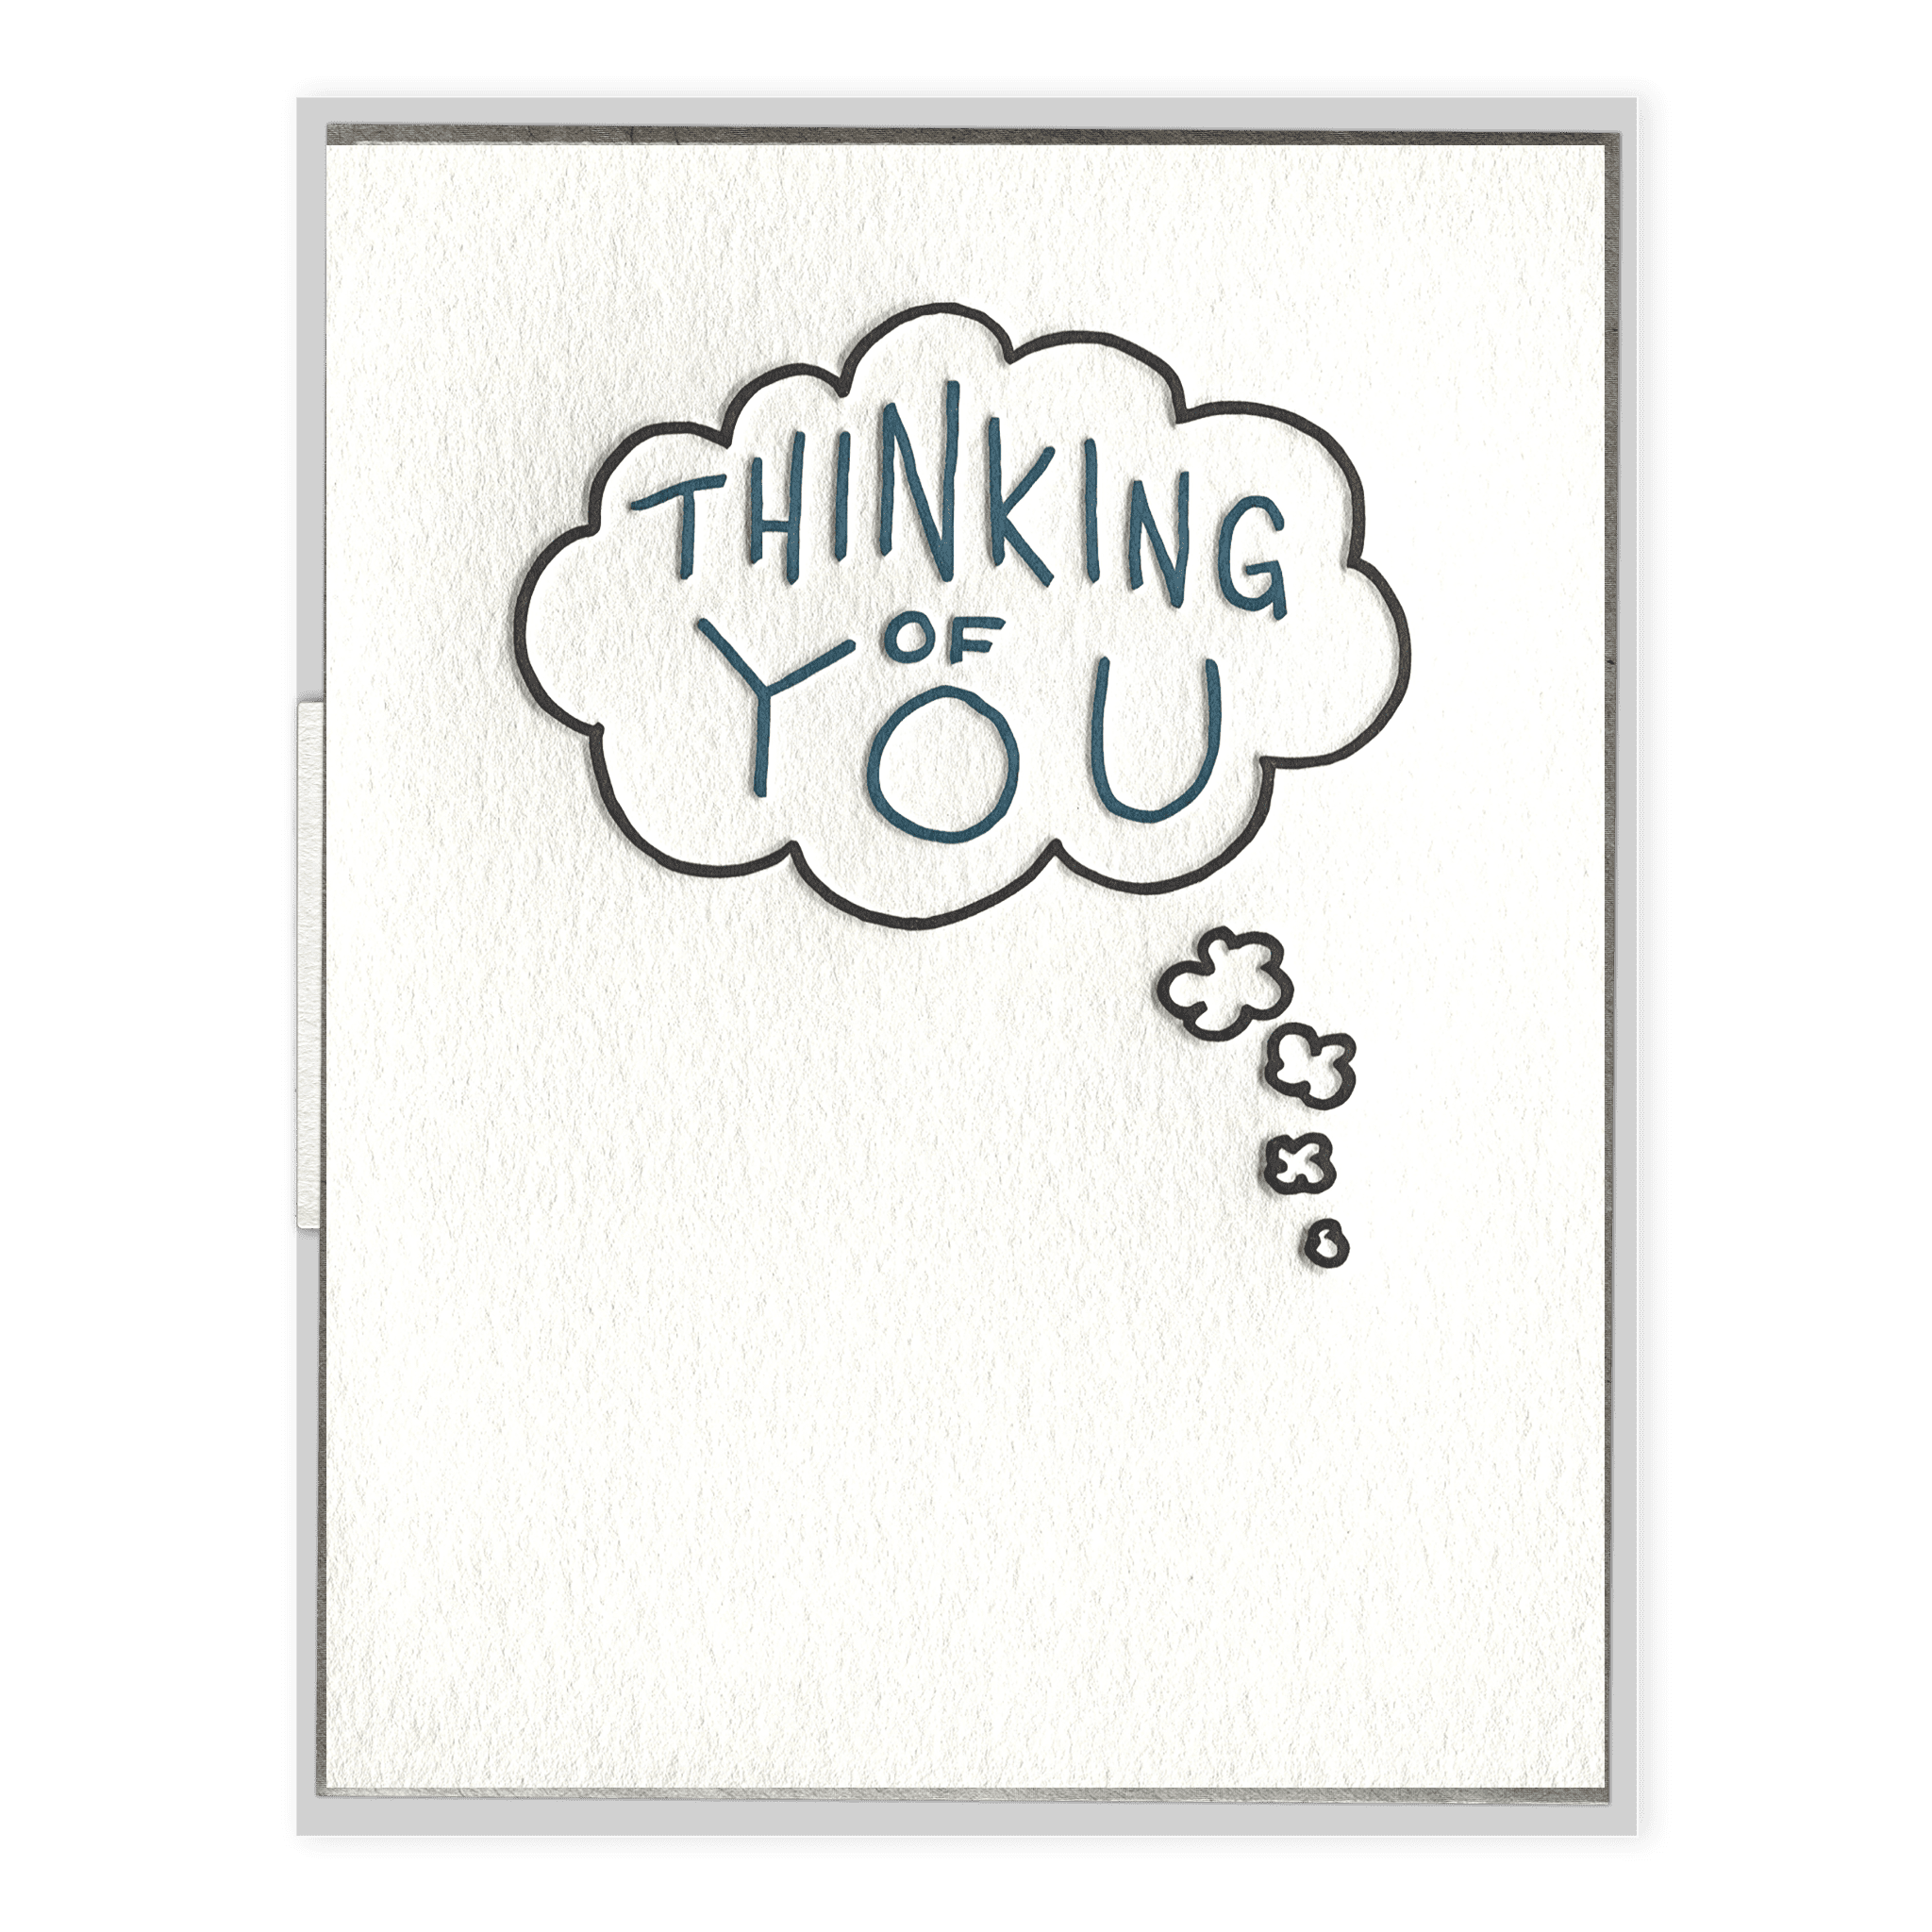 https://inkmeetspaper.com/wp-content/uploads/2017/03/thinking-of-you-bubble-letterpress-greeting-card.png